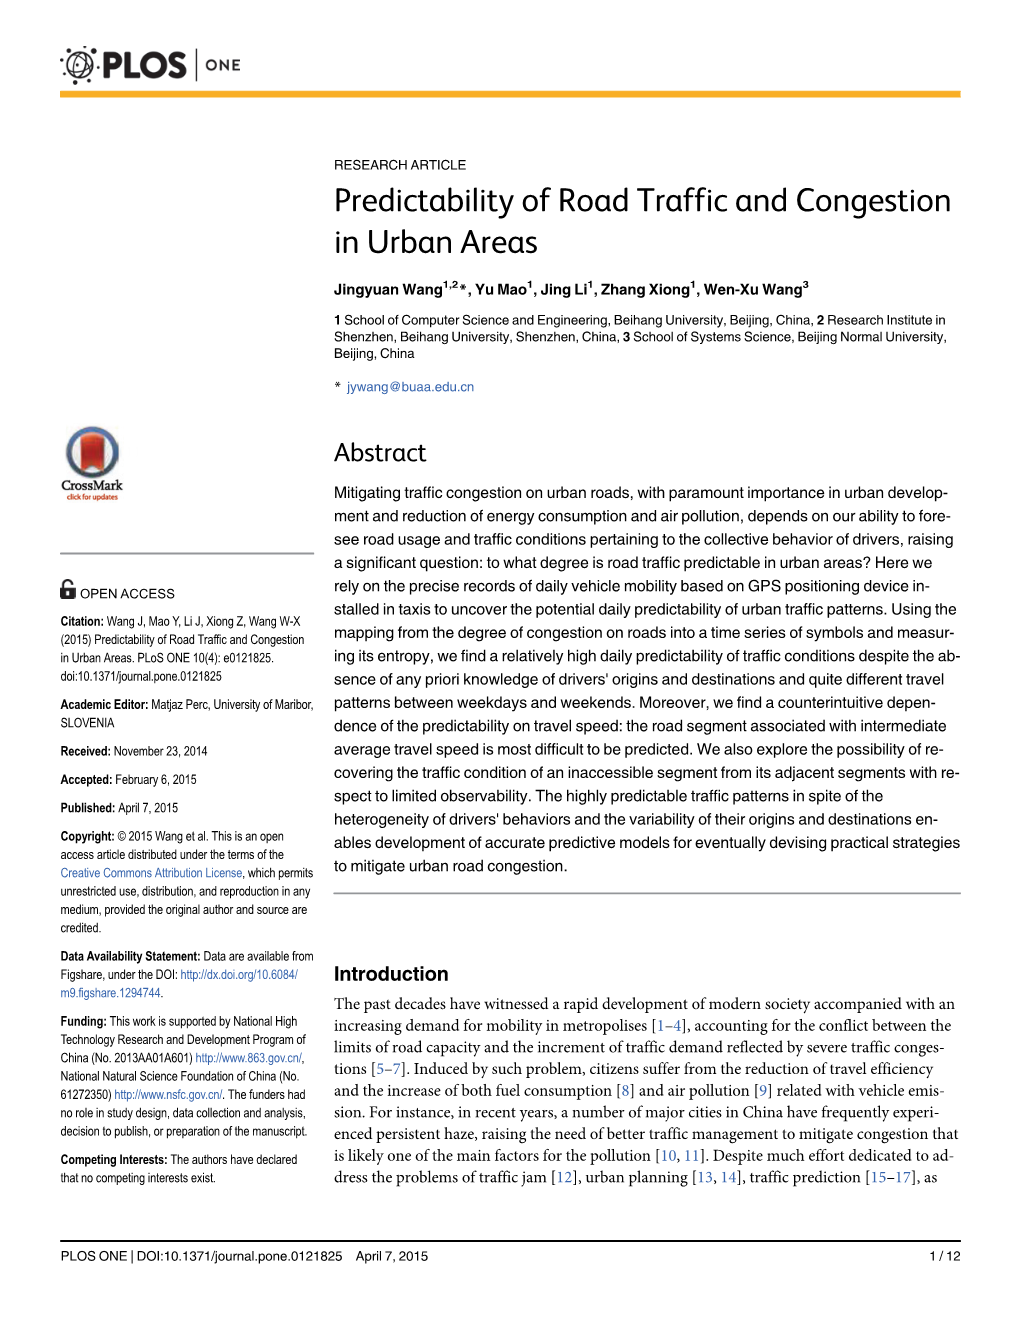 Predictability of Road Traffic and Congestion in Urban Areas